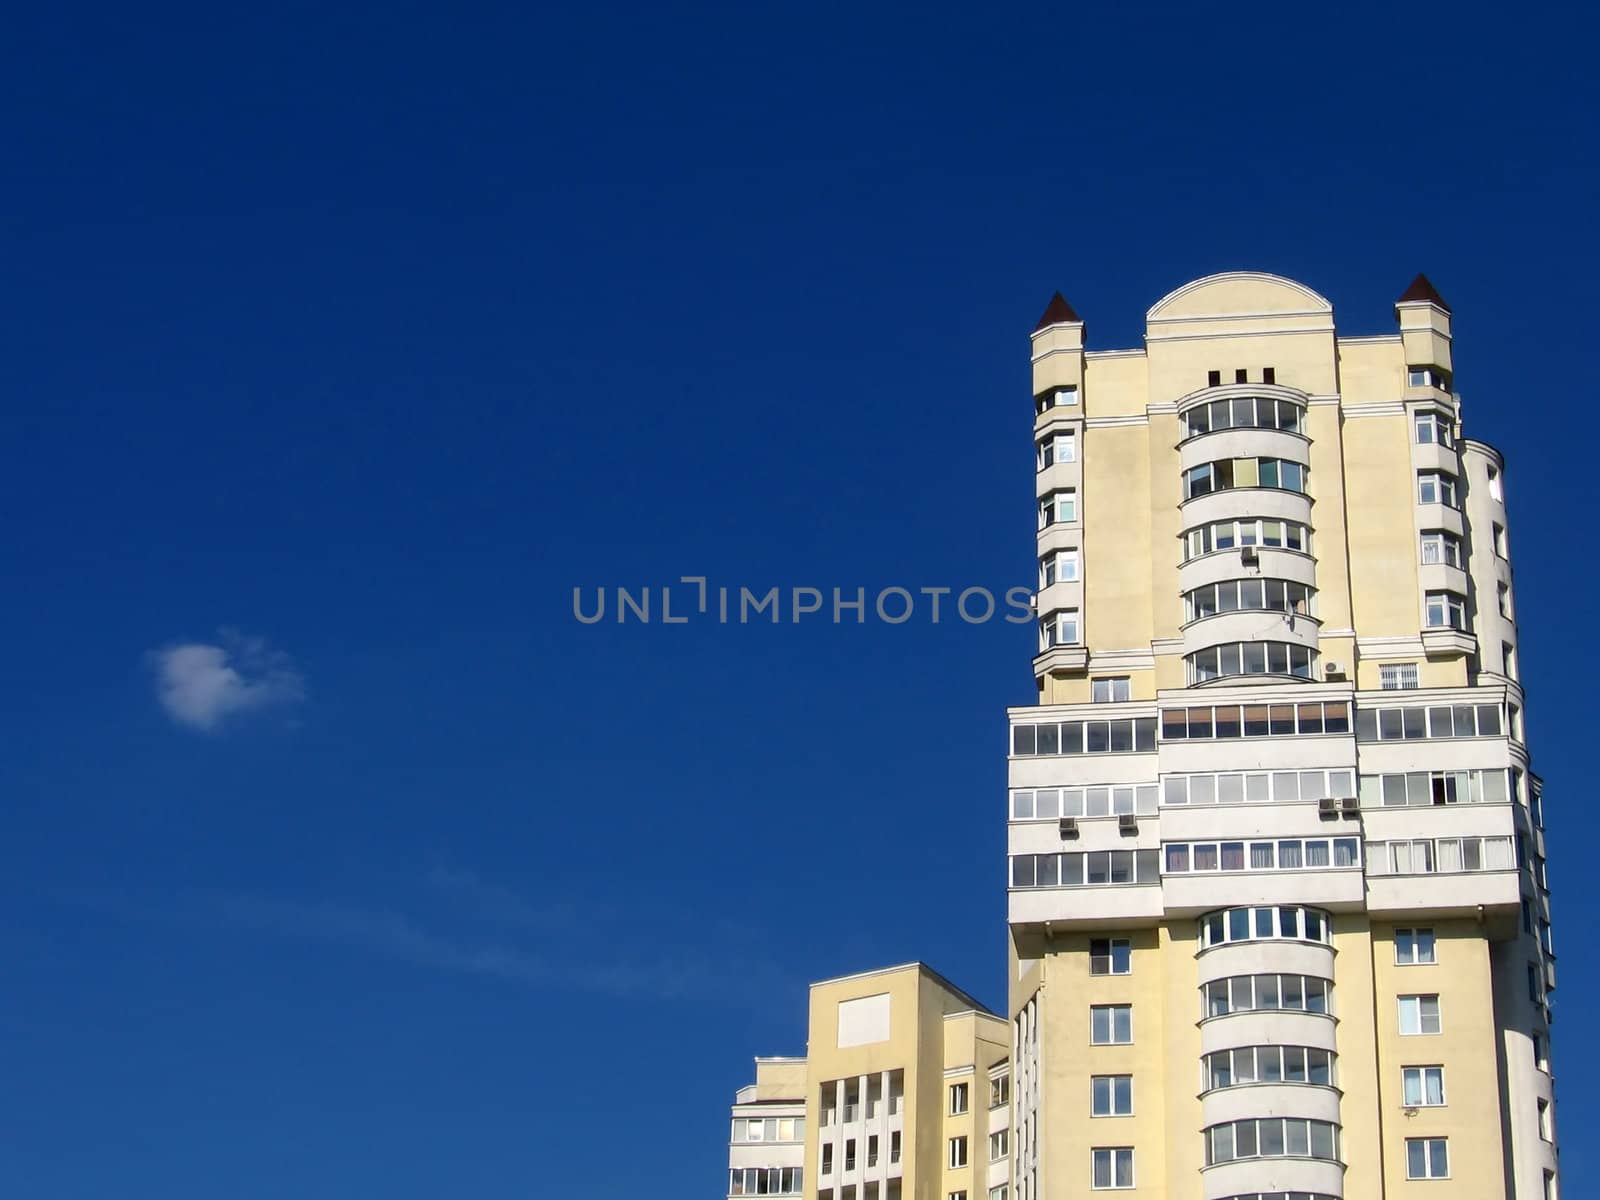 Very beautiful inhabited tower on a background of blue sky